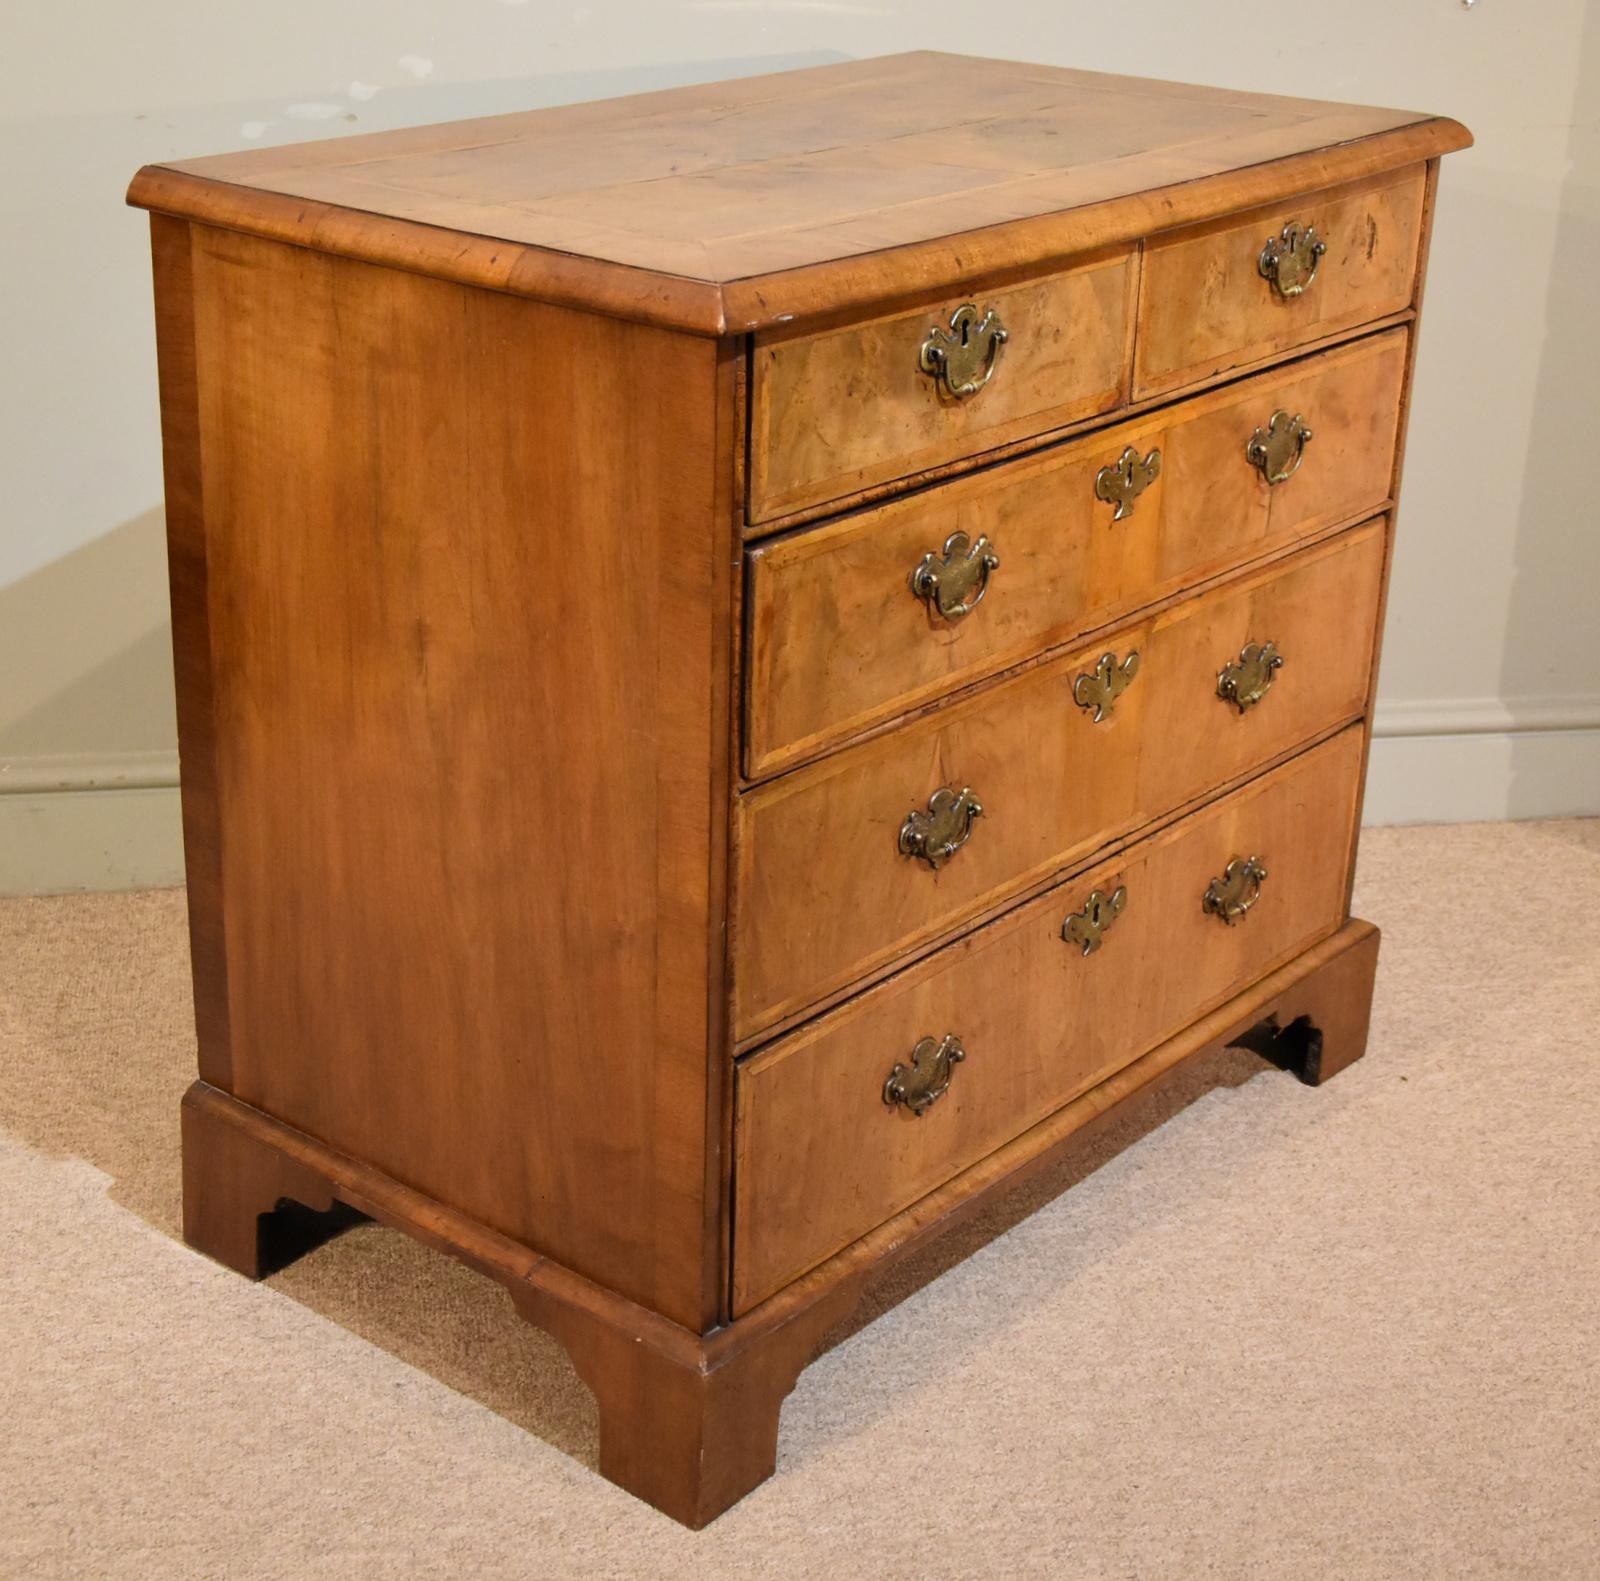 An elegant George I walnut veneered chest of drawers with later feet and handles

height 33.5